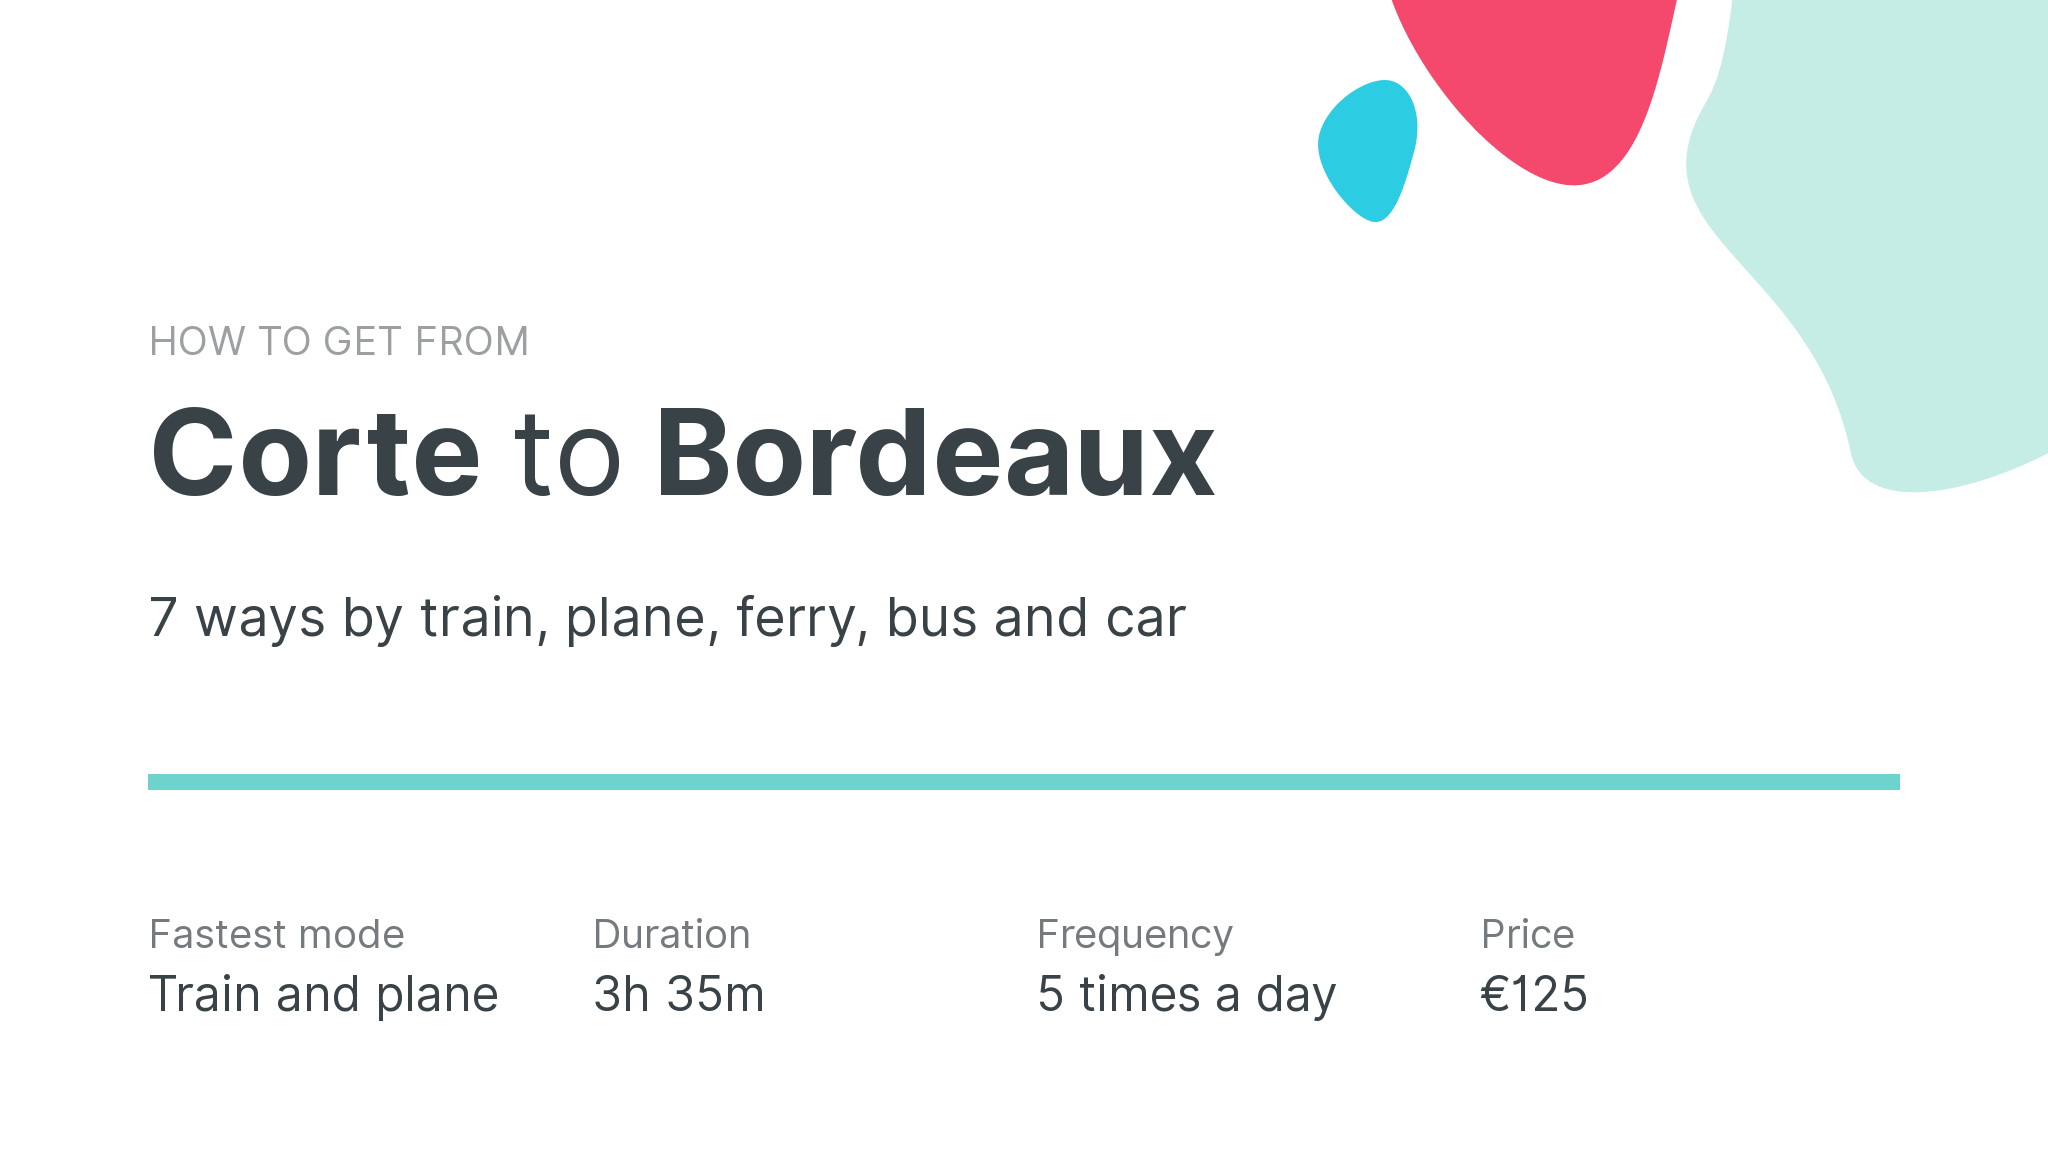 How do I get from Corte to Bordeaux